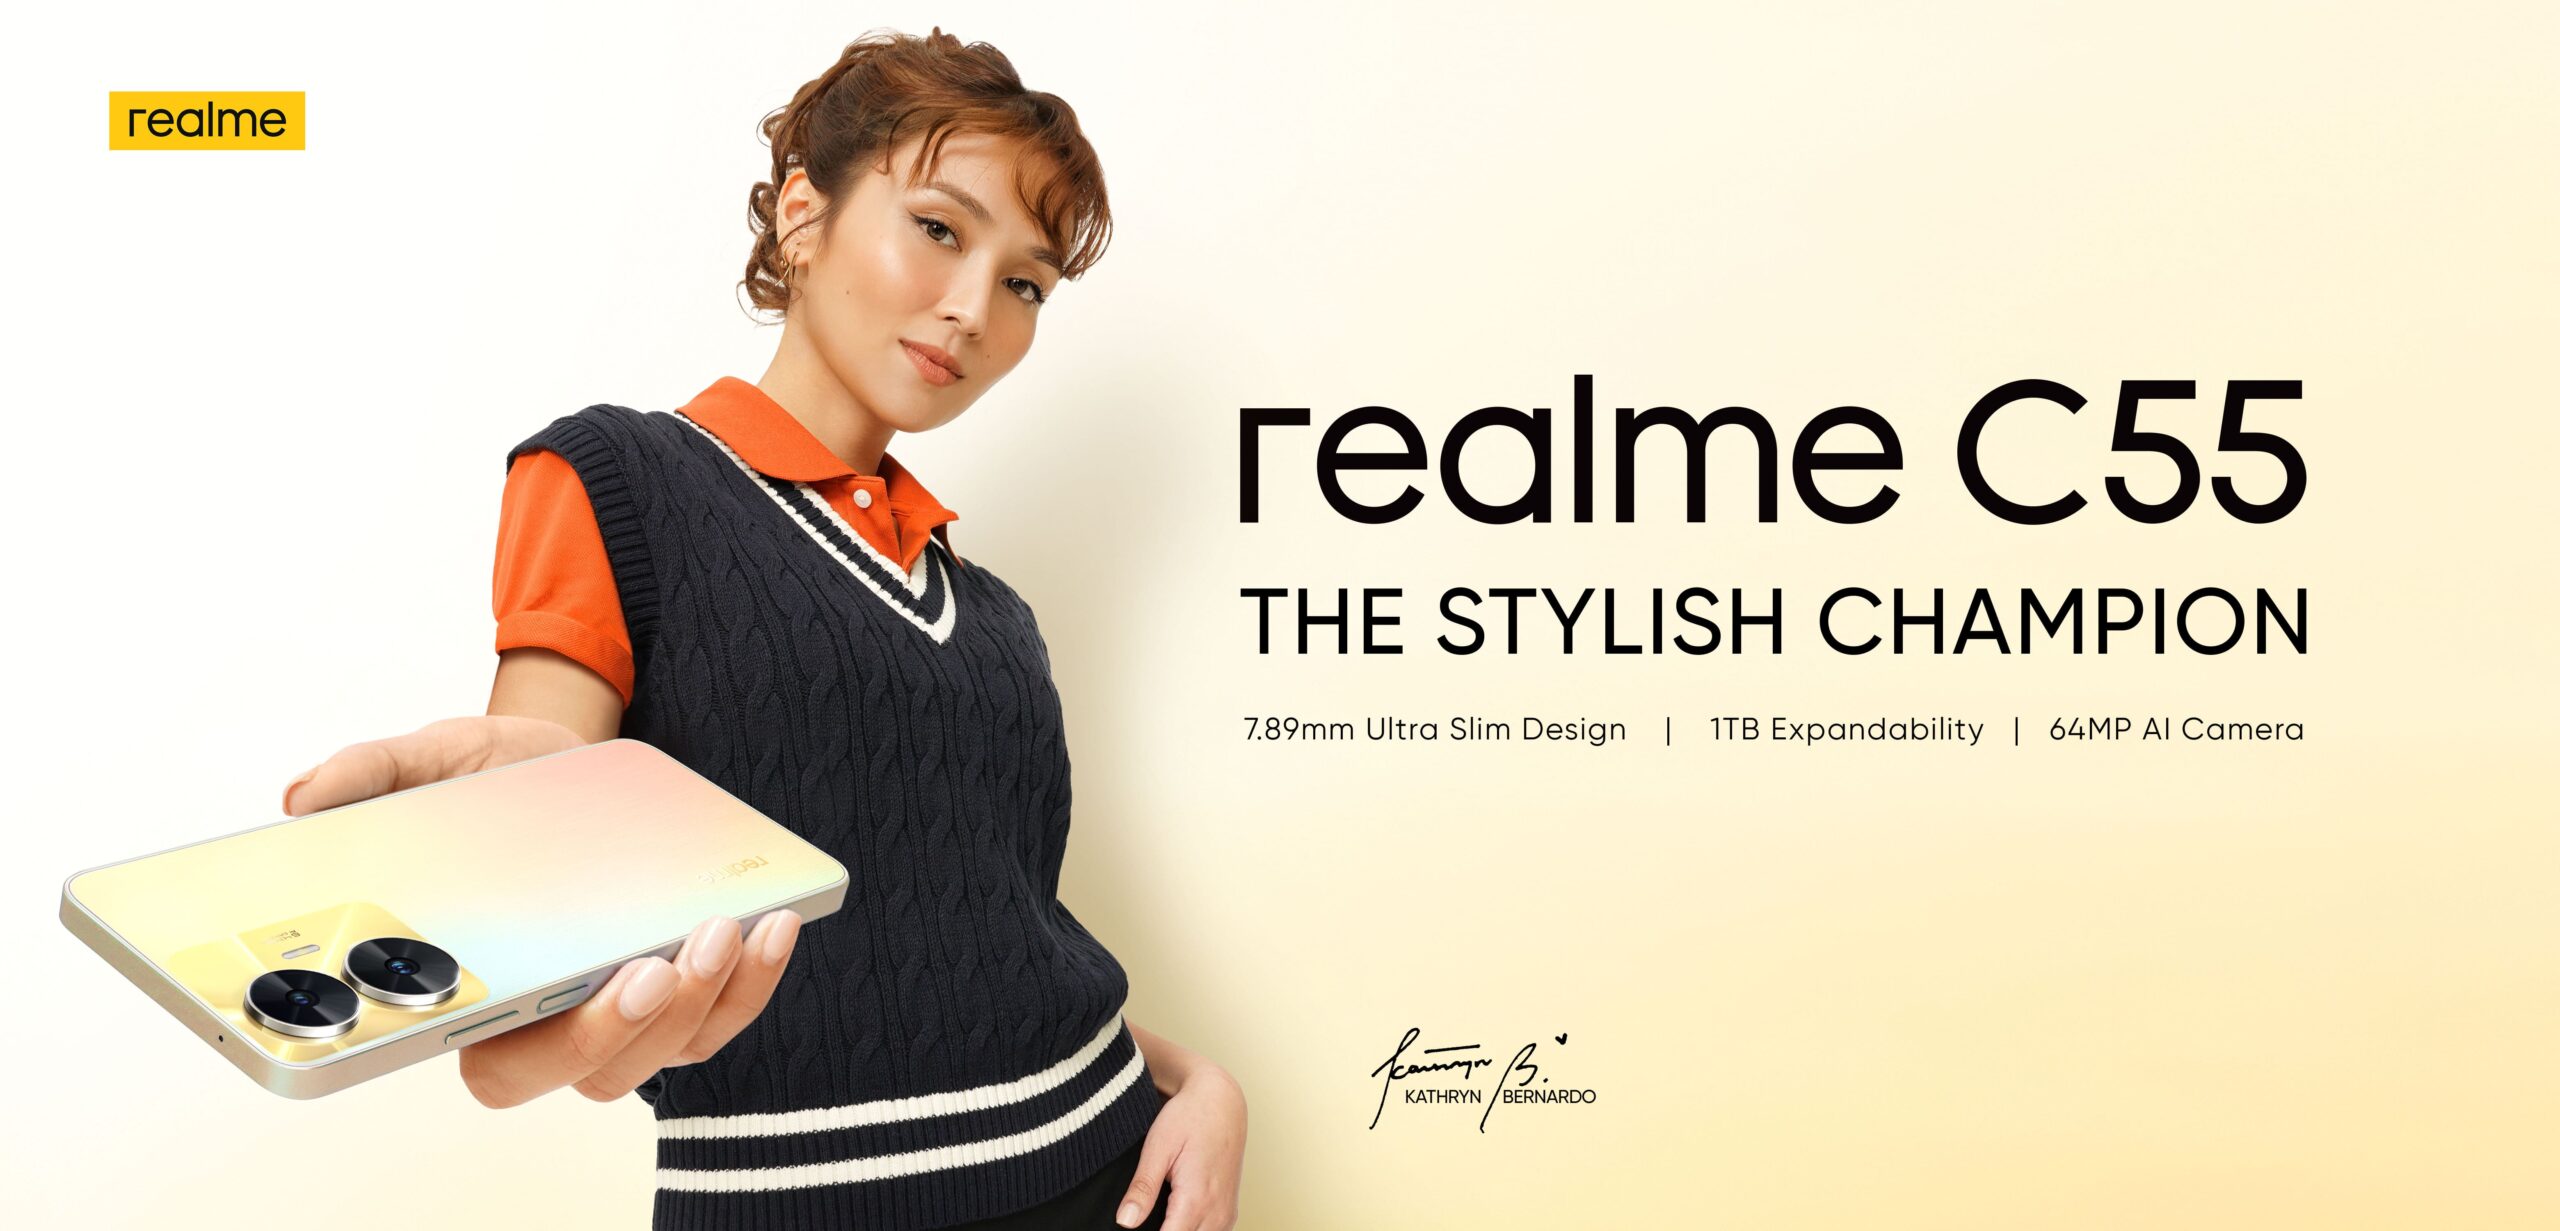 realme C55 set to launch in PH this April 18_Photo 1-min